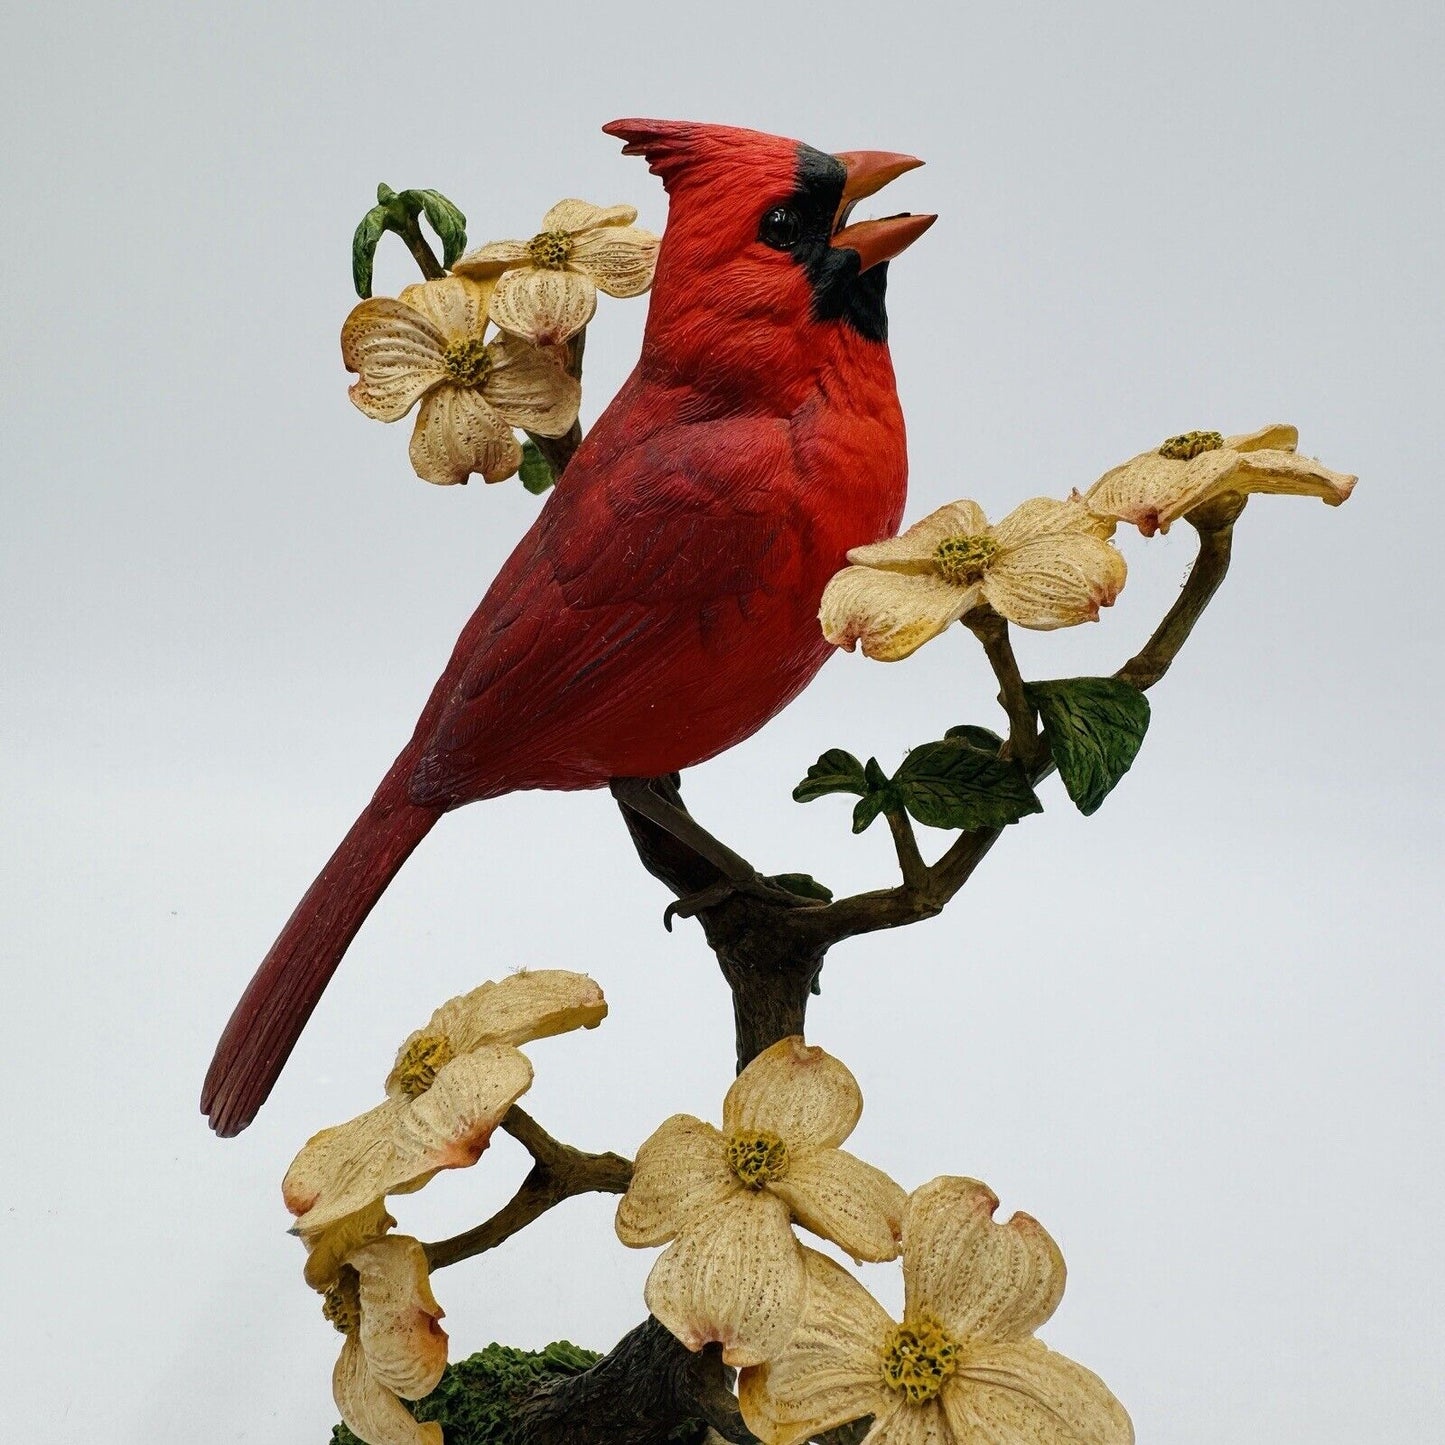 The Danbury Mint Collection Spring Time Music Bob Guge Cardinal Figurine 8”